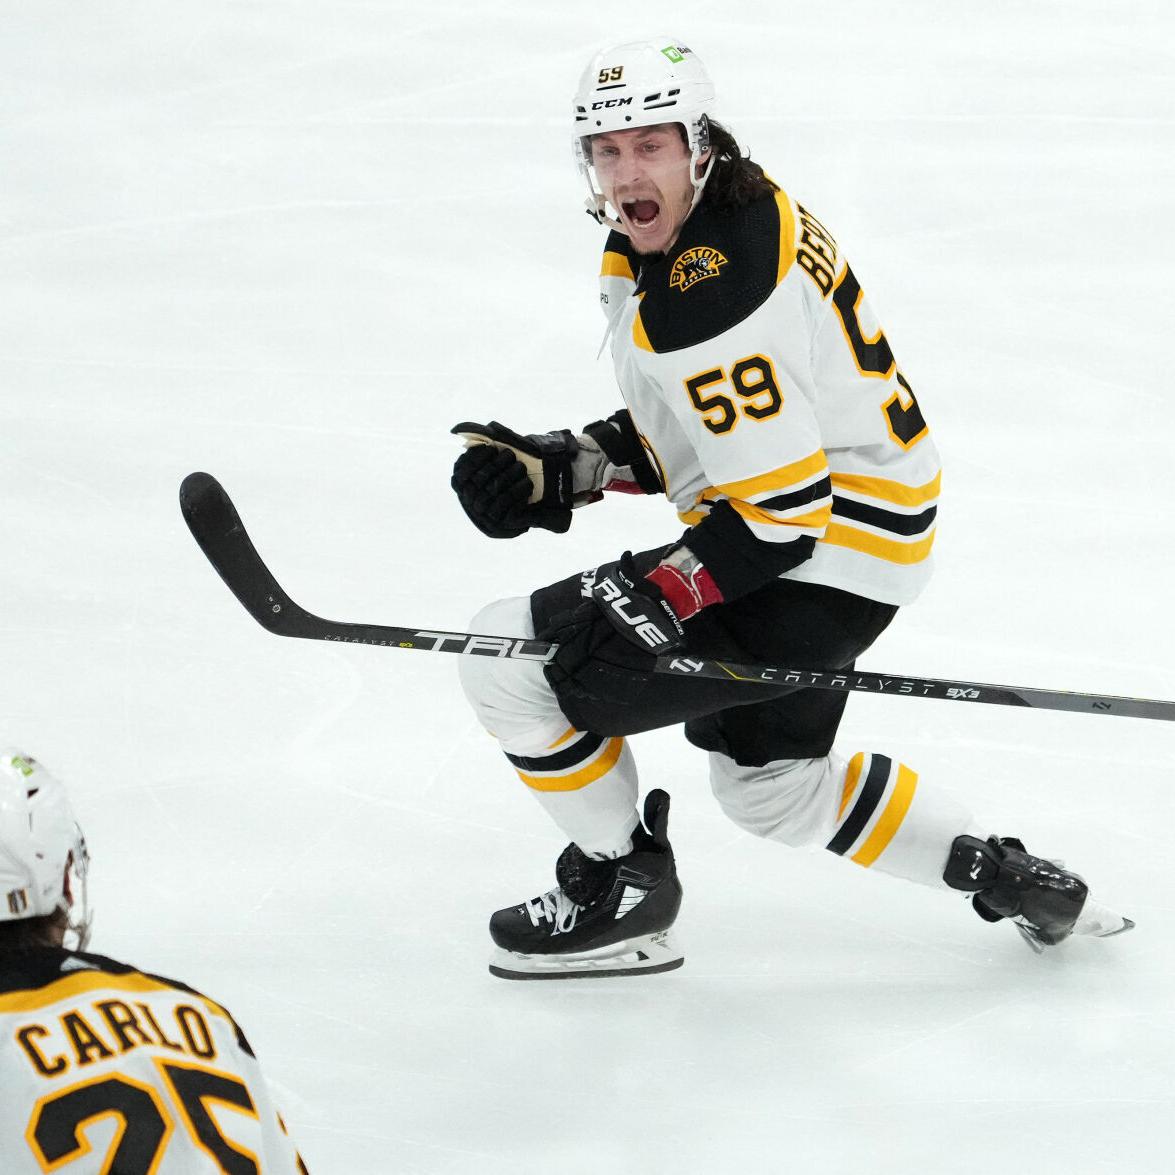 Bruins win second straight game in Florida for 3-1 series lead